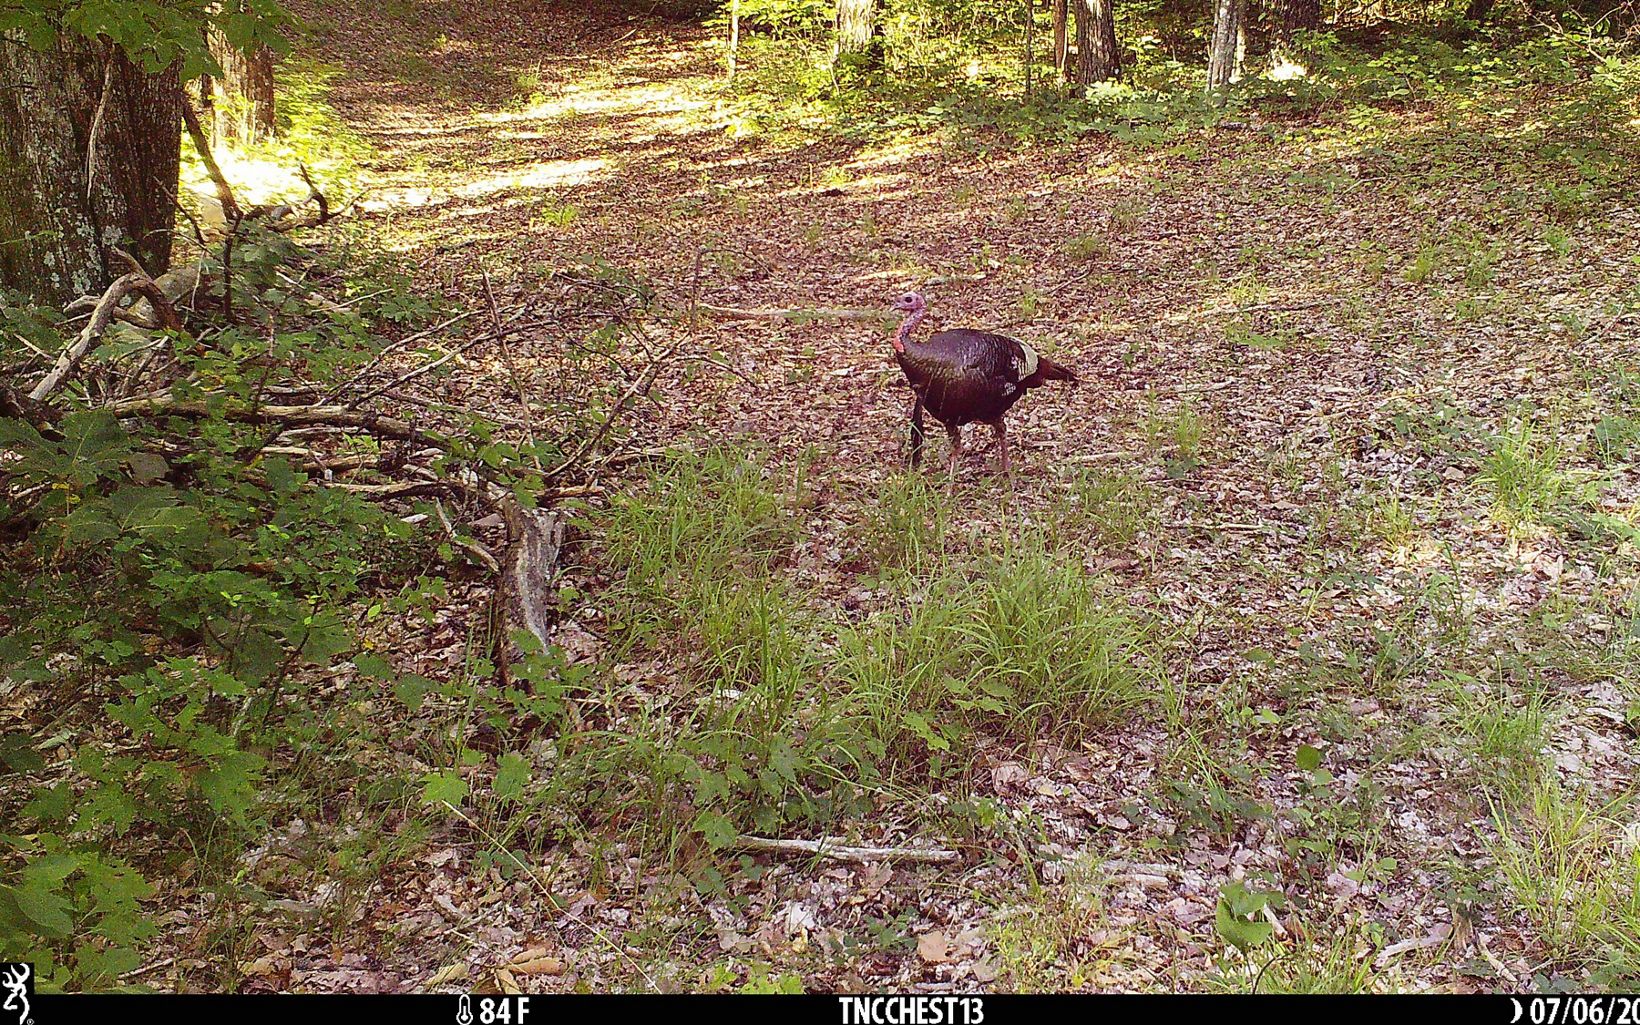 A turkey wanders through the woods.